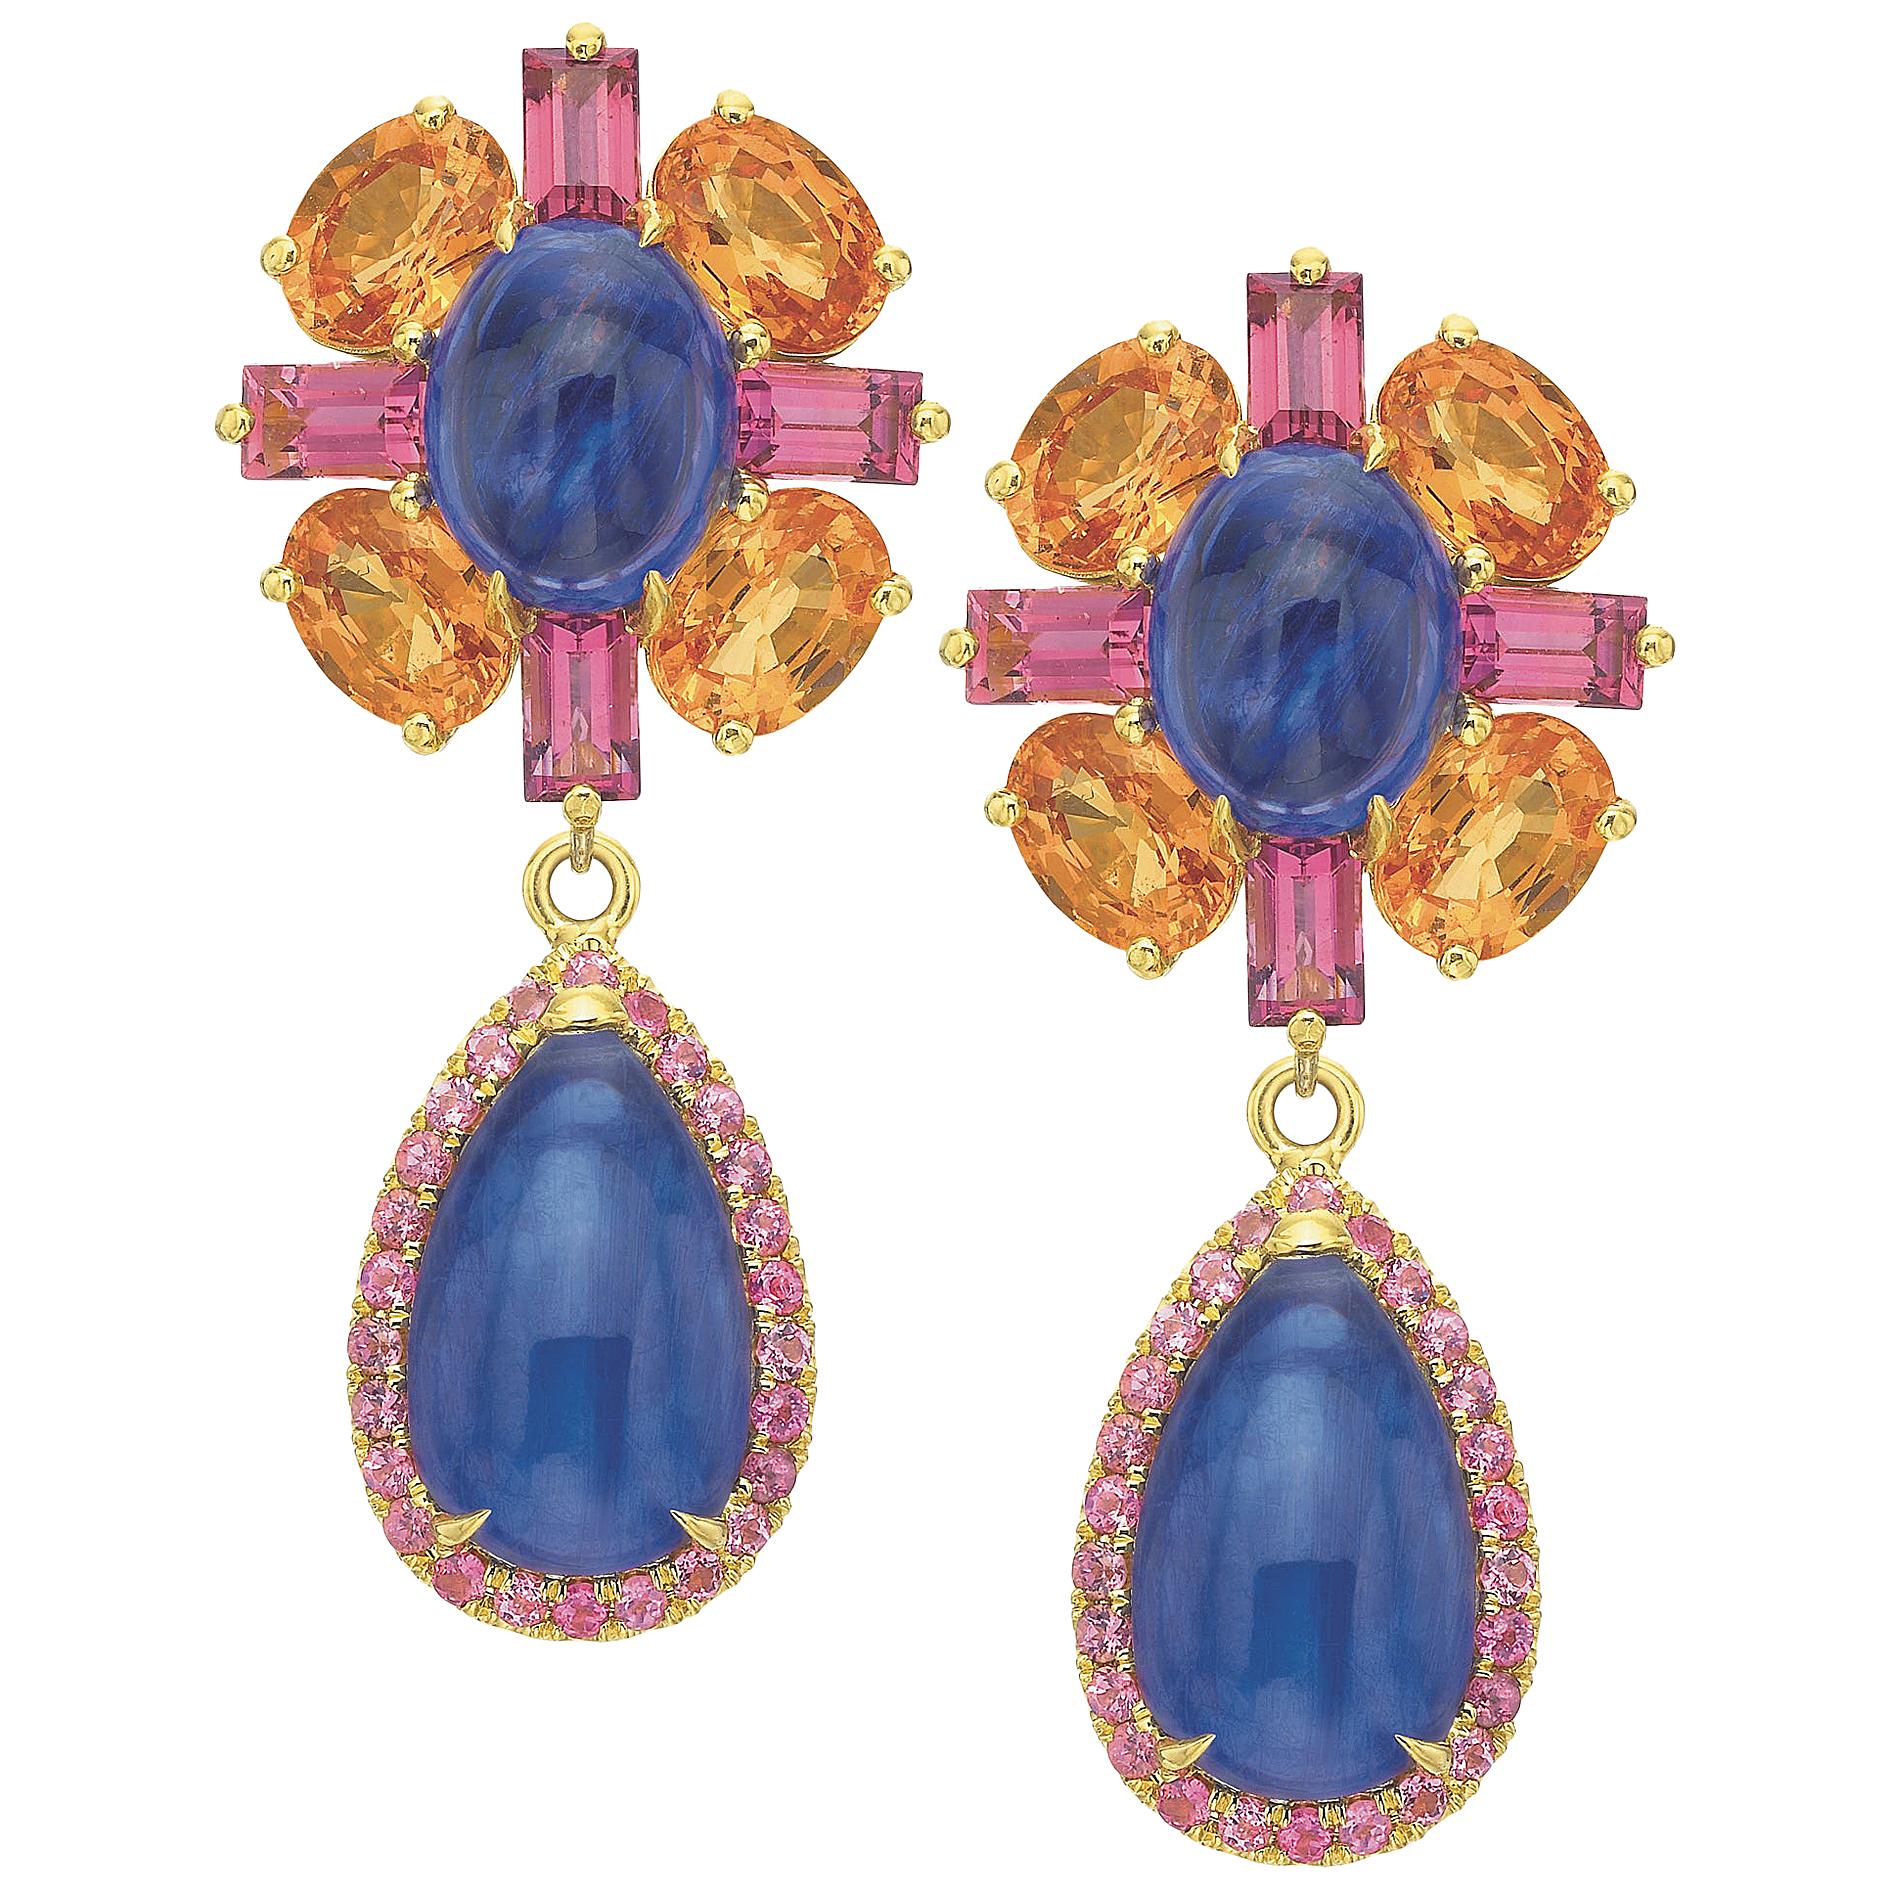 Tanzanite, Spessartite Garnet and Pink Tourmaline Day to Night Earrings For Sale